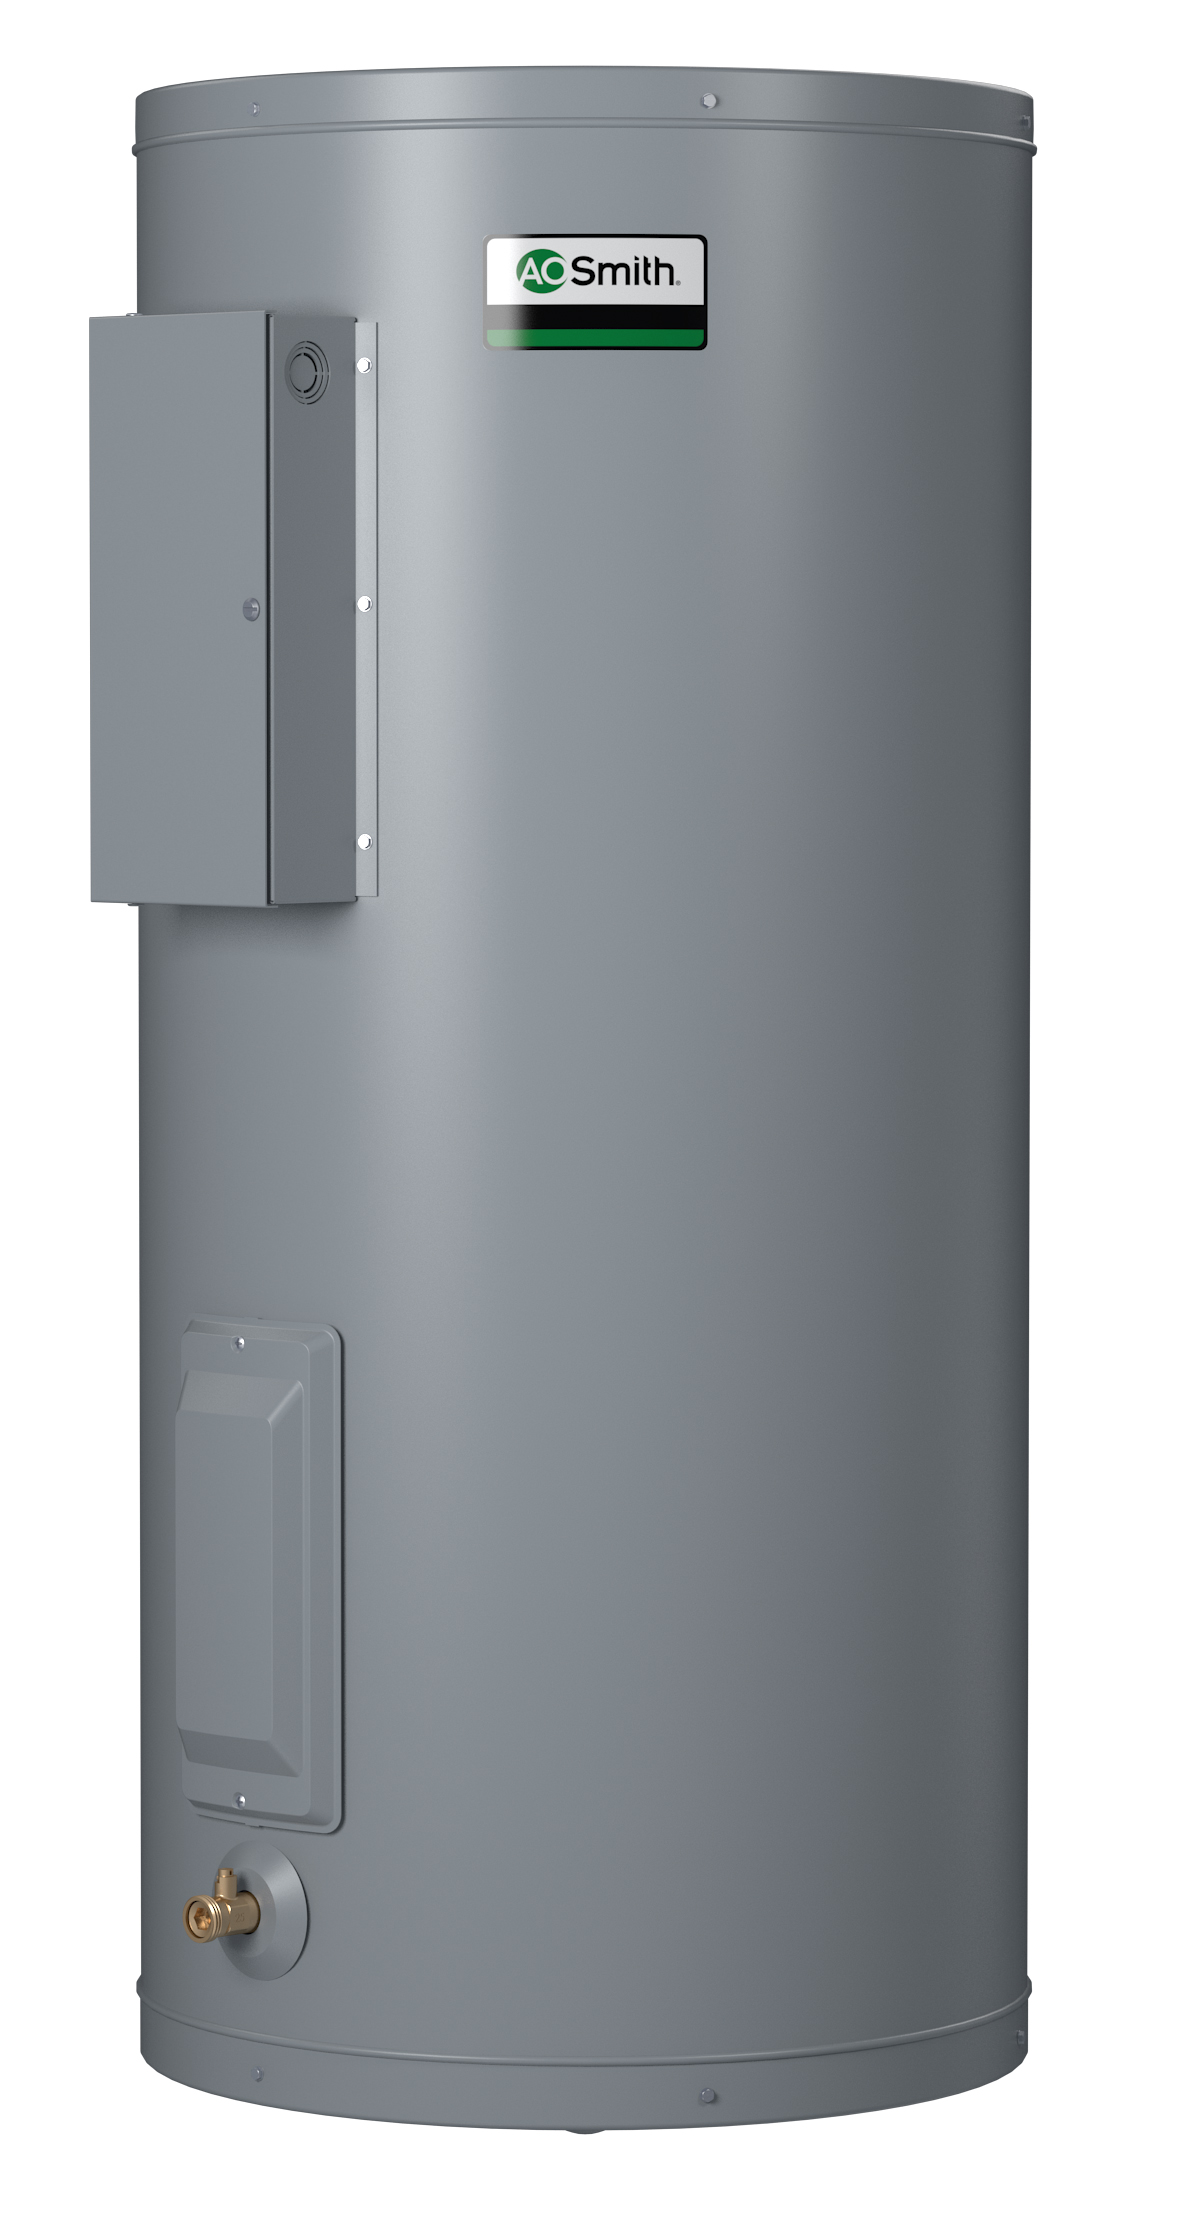 AO SMITH DEN-120D: 120 GALLONS, 2.0KW, 277 VOLT, 1 PHASE, (2-2000 WATT ELEMENTS, NON-SIMULTANEOUS WIRING), DURA-POWER, LIGHT DUTY COMMERCIAL ELECTRIC WATER HEATER